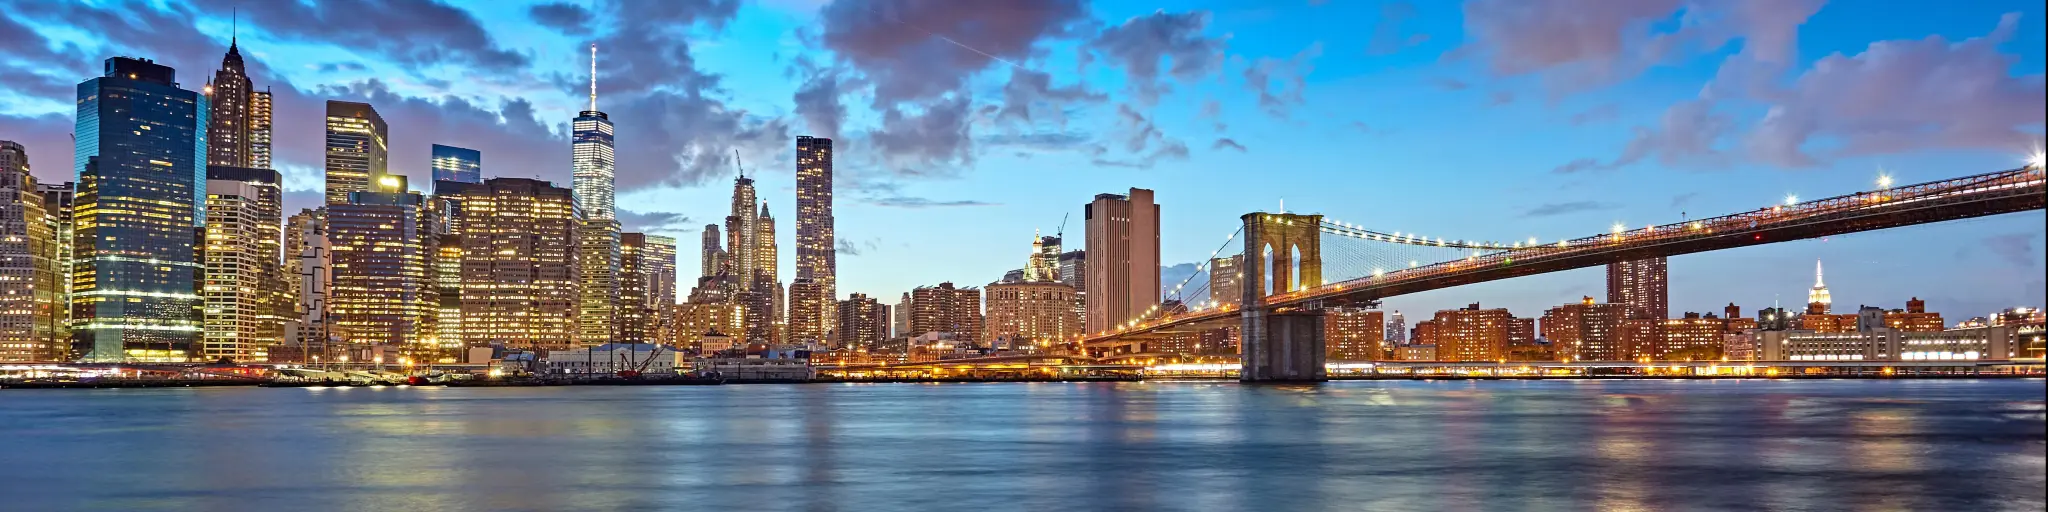 New York City, USA with the Manhattan skyline and Brooklyn Bridge as seen from across the East River at dusk. 